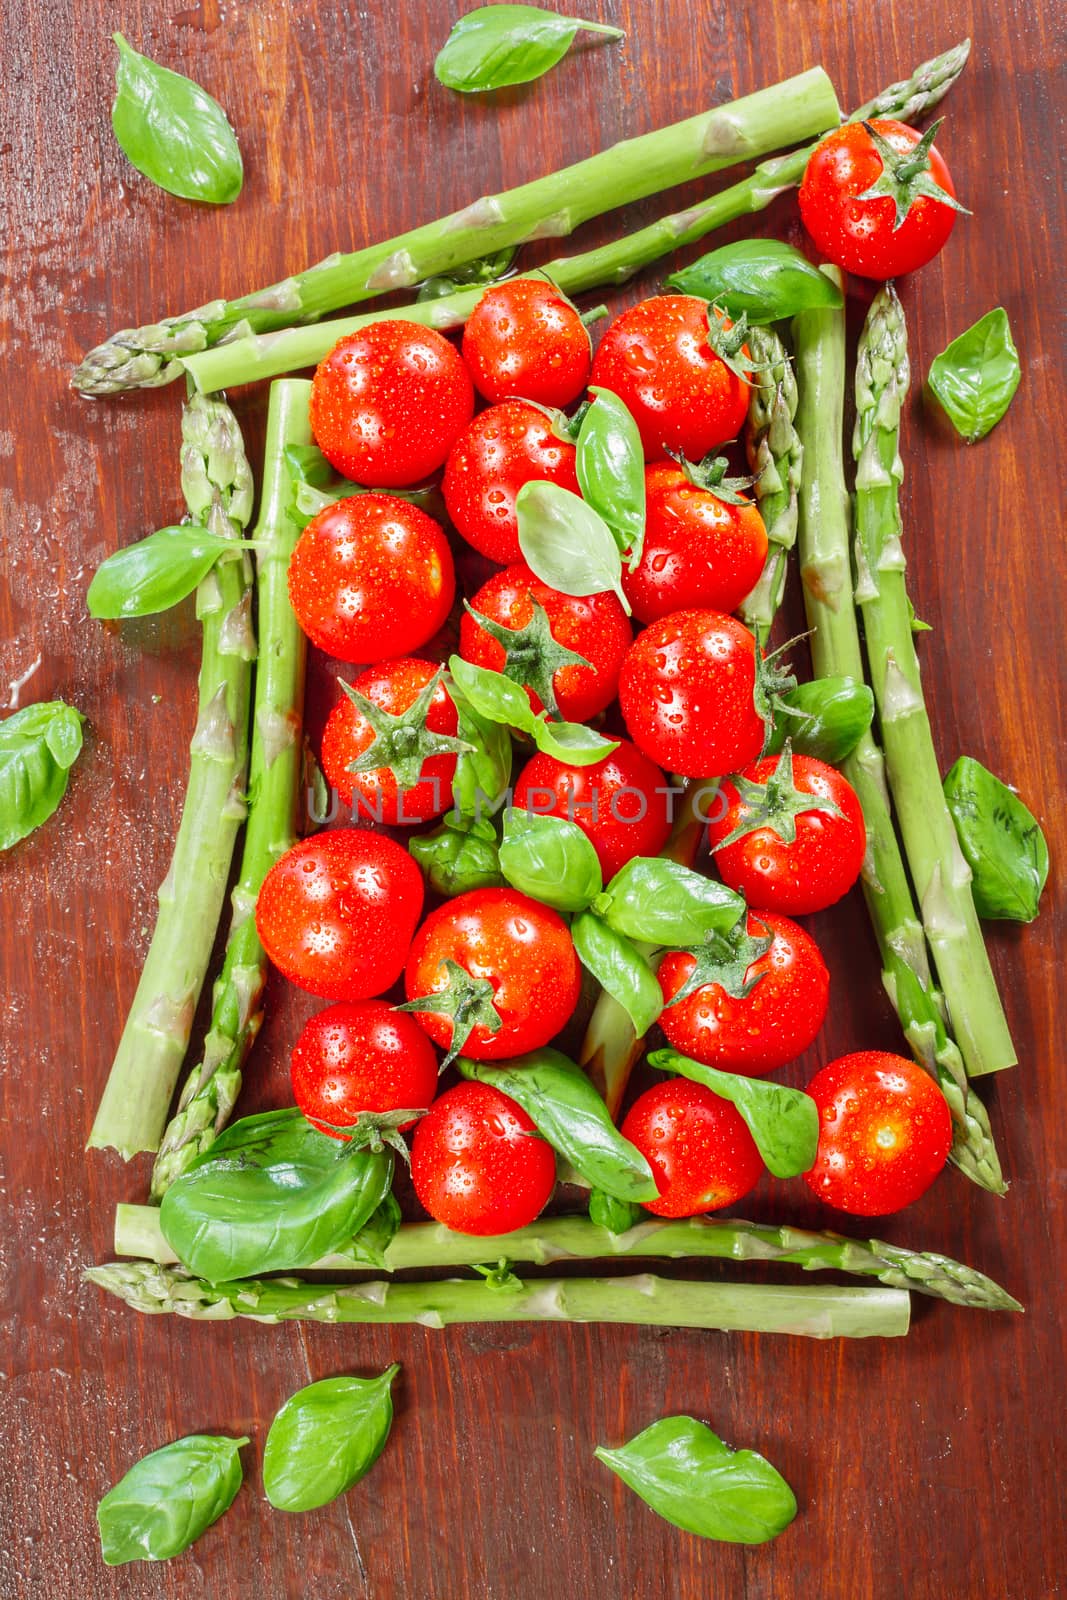 Green asparagus and cherry tomatoes by Slast20